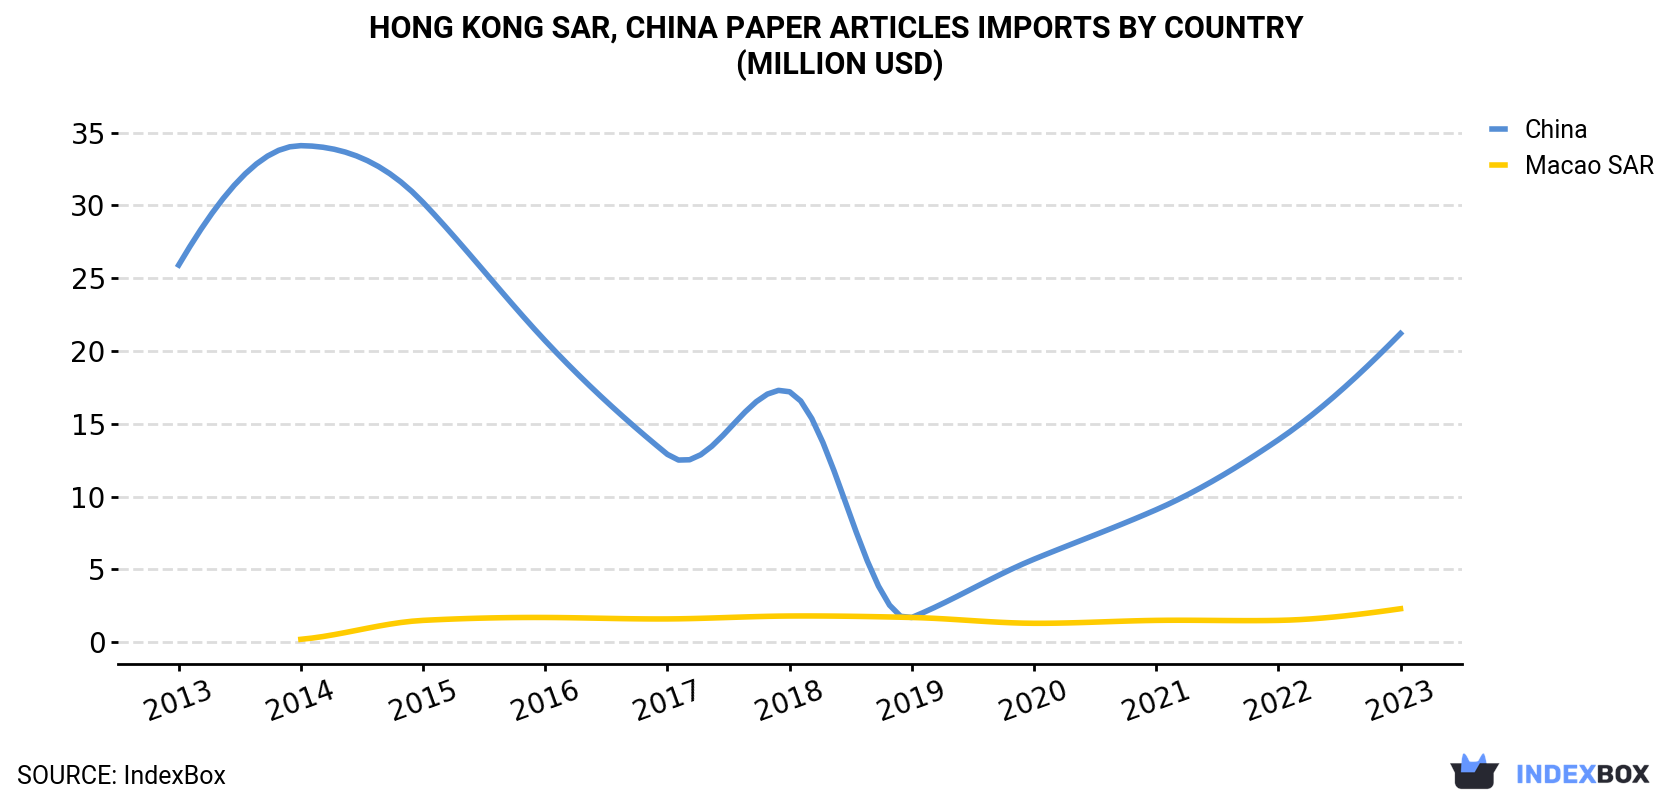 Hong Kong Paper Articles Imports By Country (Million USD)